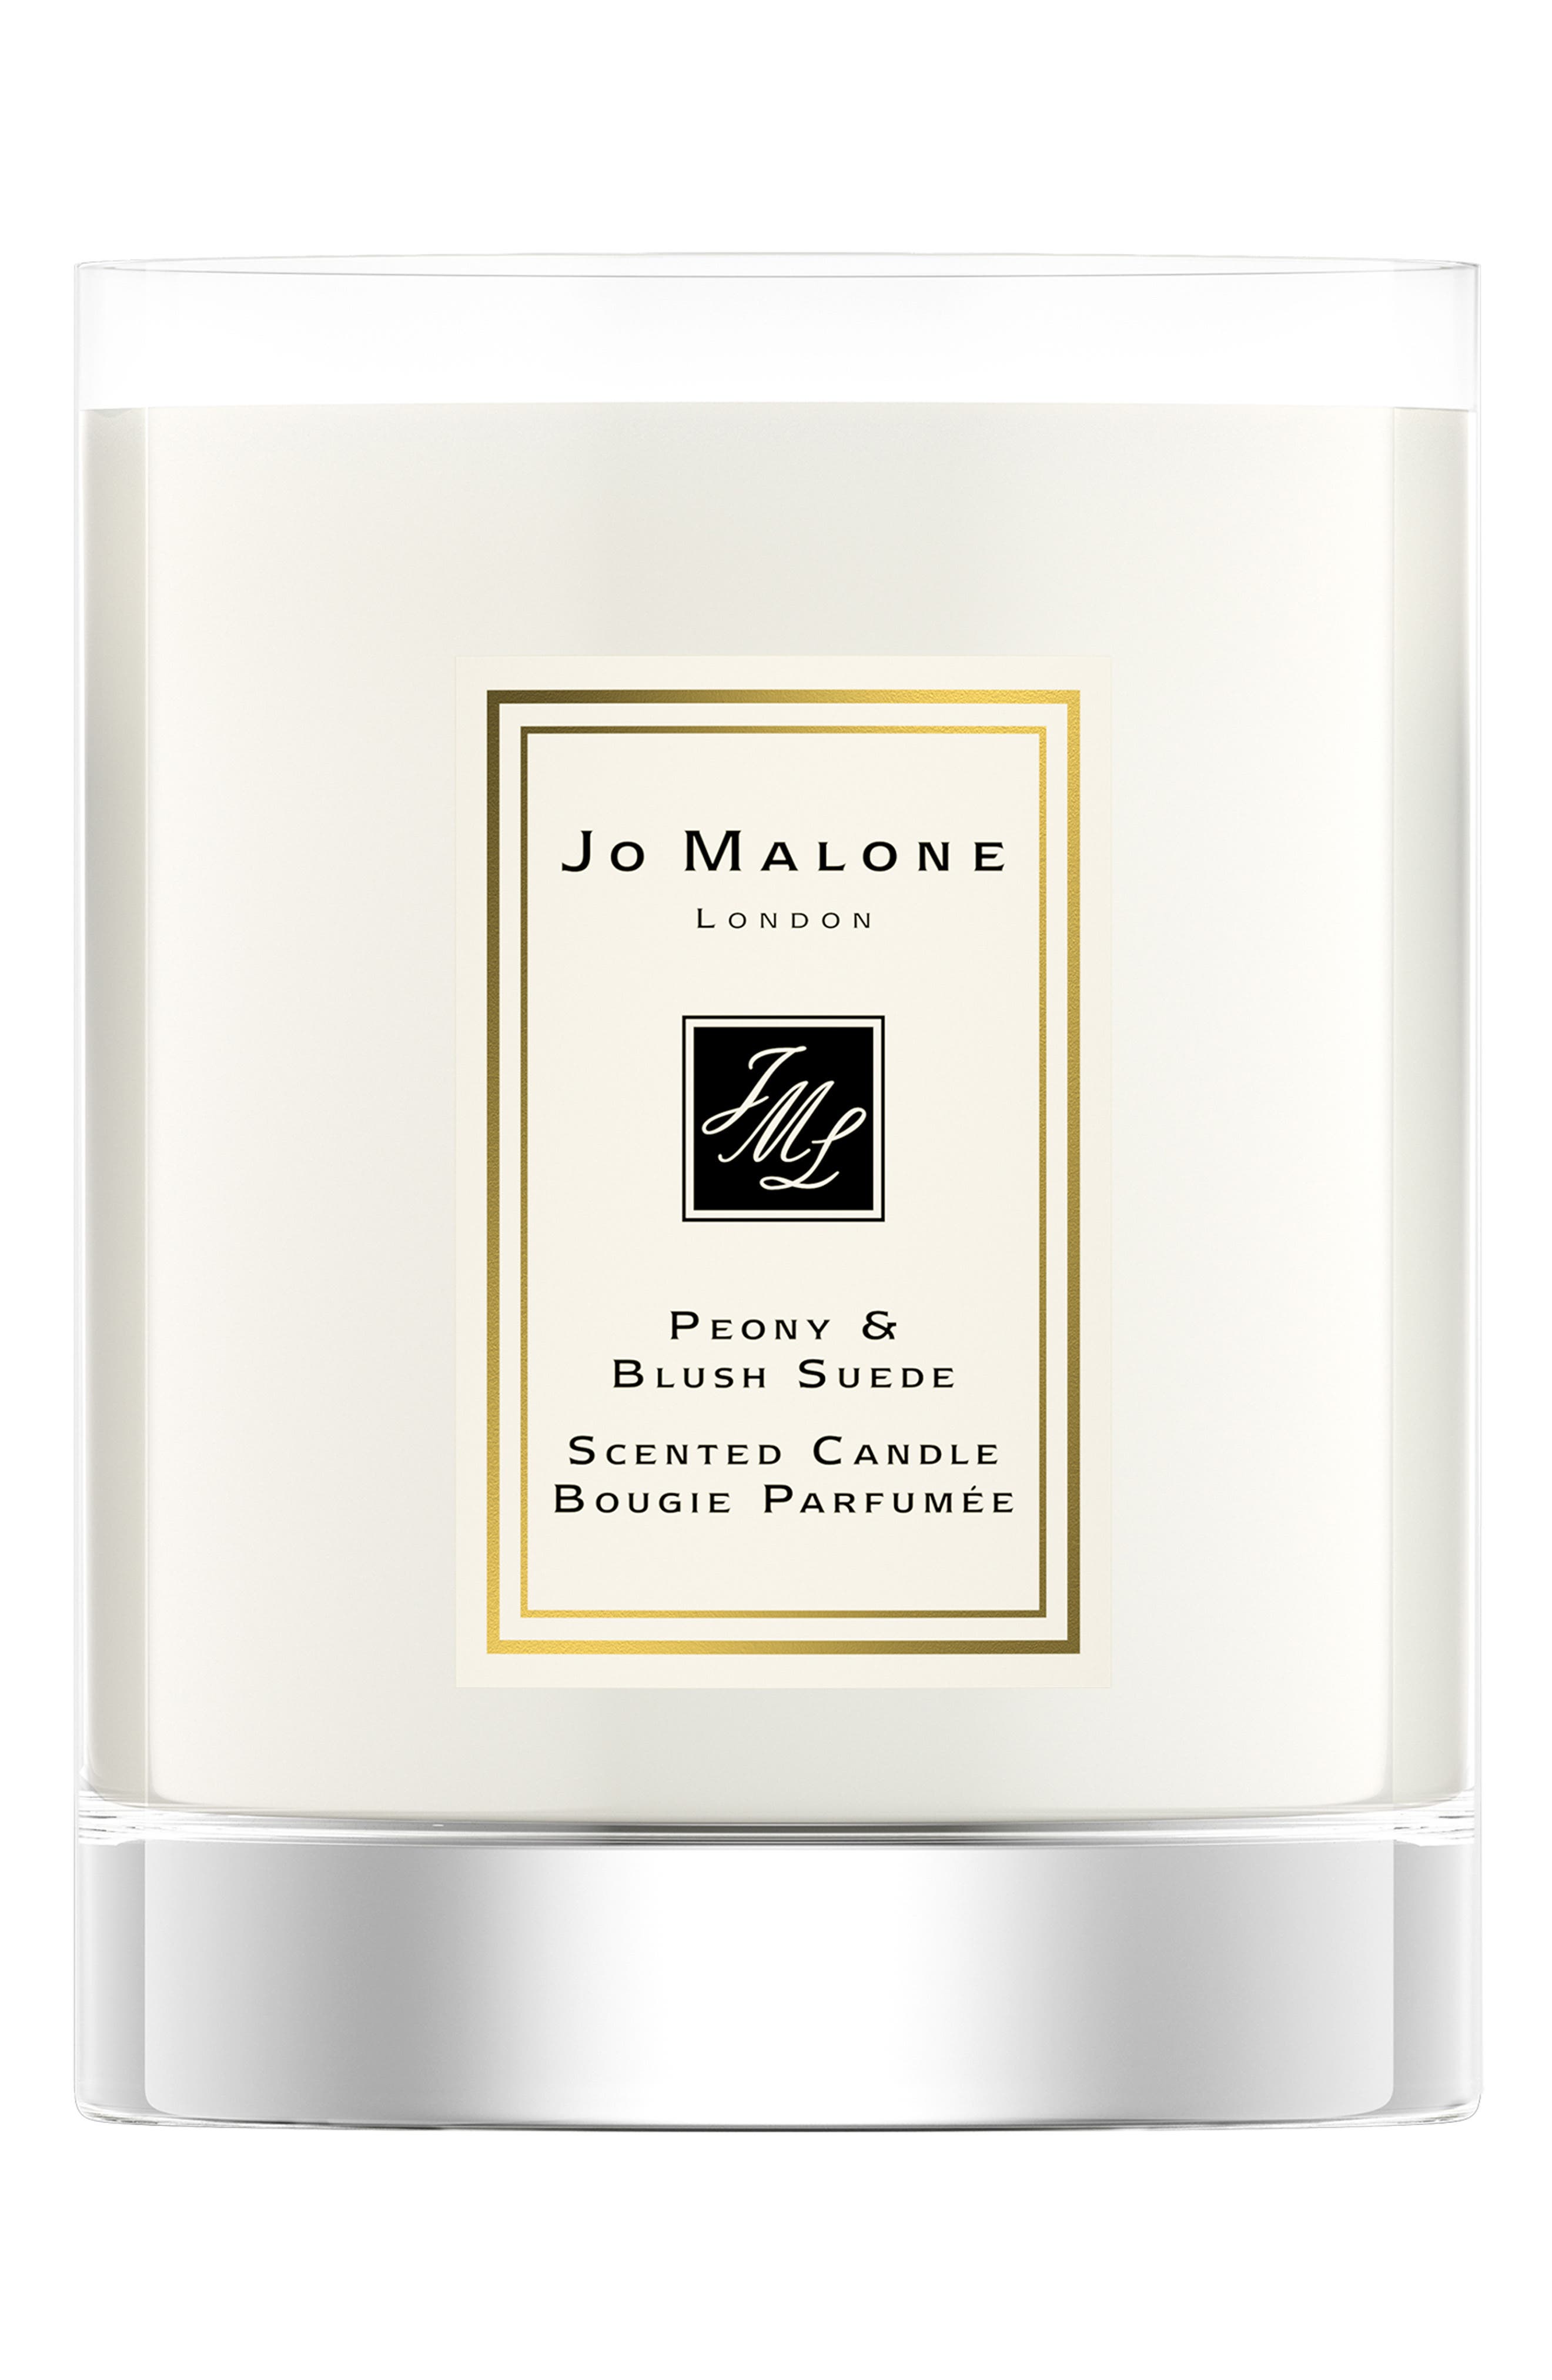 JO MALONE LONDON CAROUSEL MINIATURES CANDLE COLLECTION X 5 LIMITED EDITION BNIB 